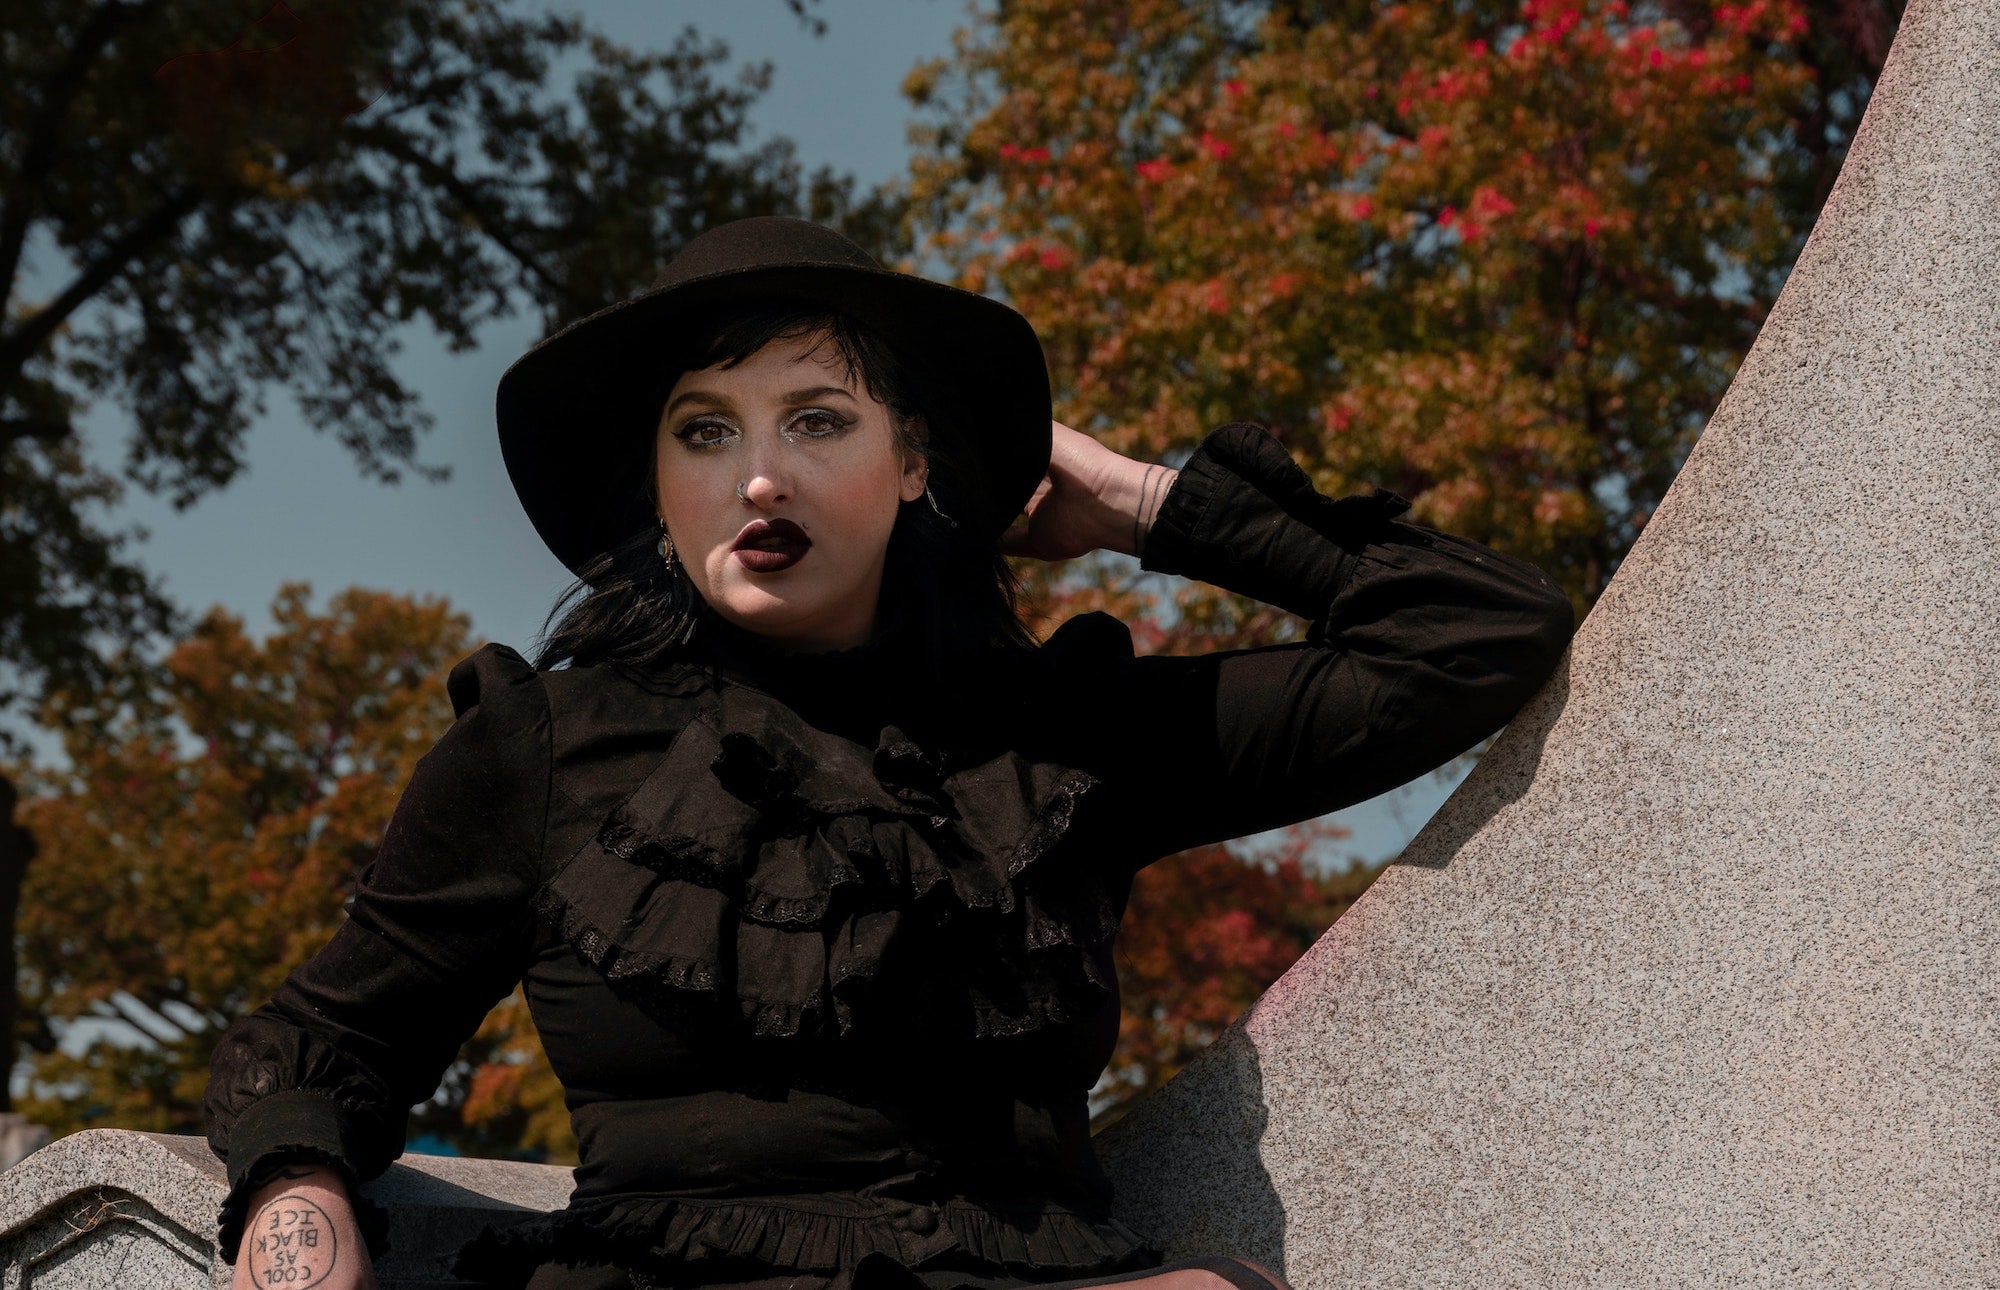 Plus Size Goth Clothing: Where to Find the Best Outfits, Stores